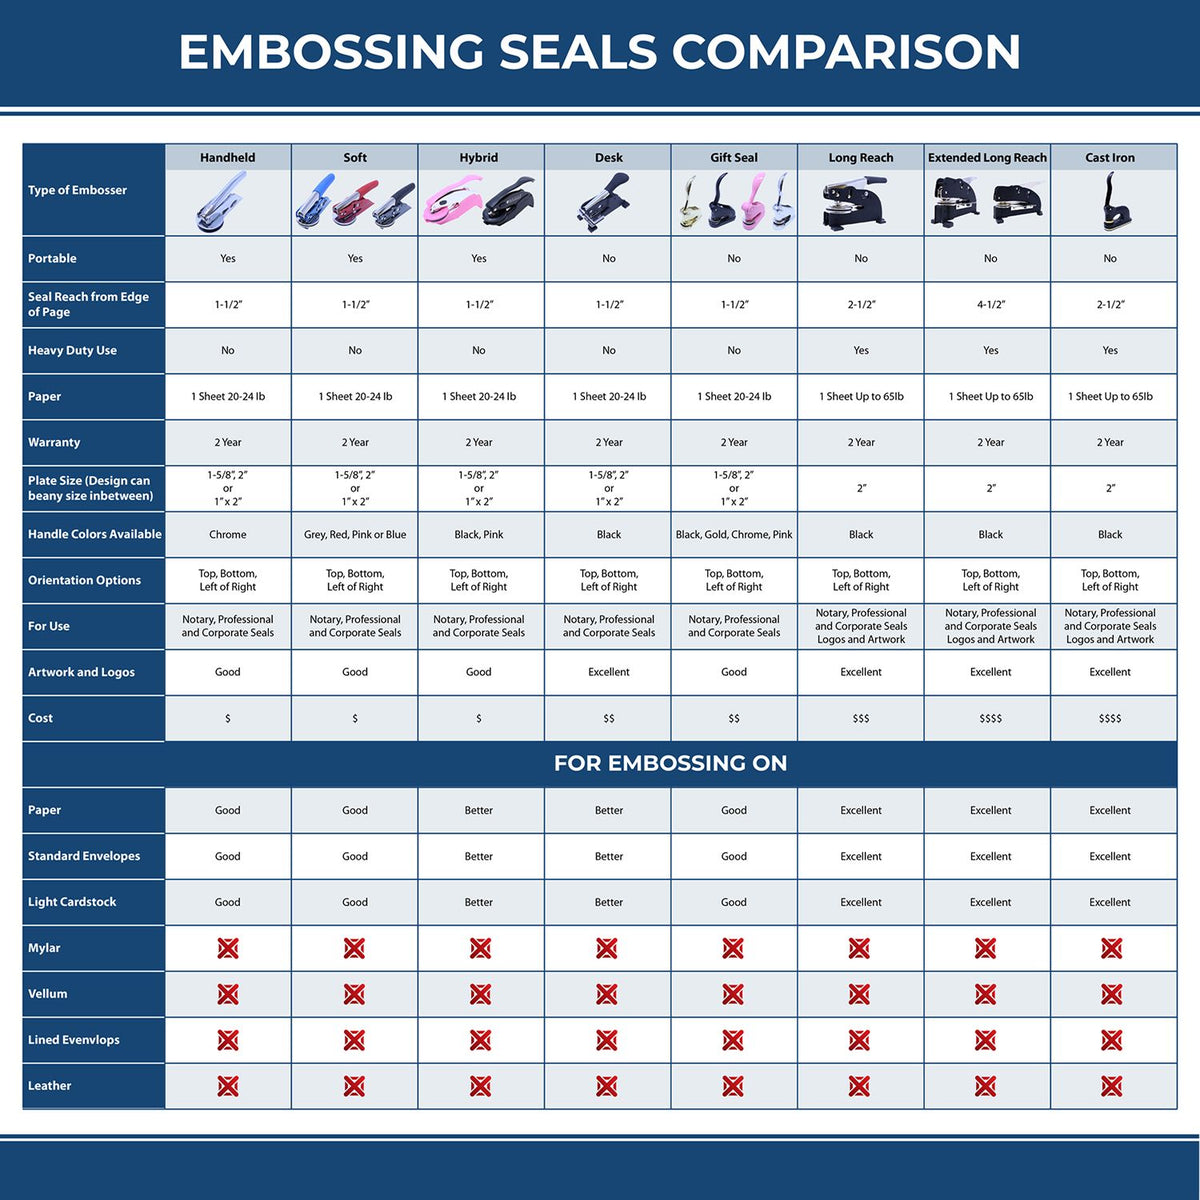 A comparison chart for the different types of mount models available for the Extended Long Reach Delaware Surveyor Embosser.